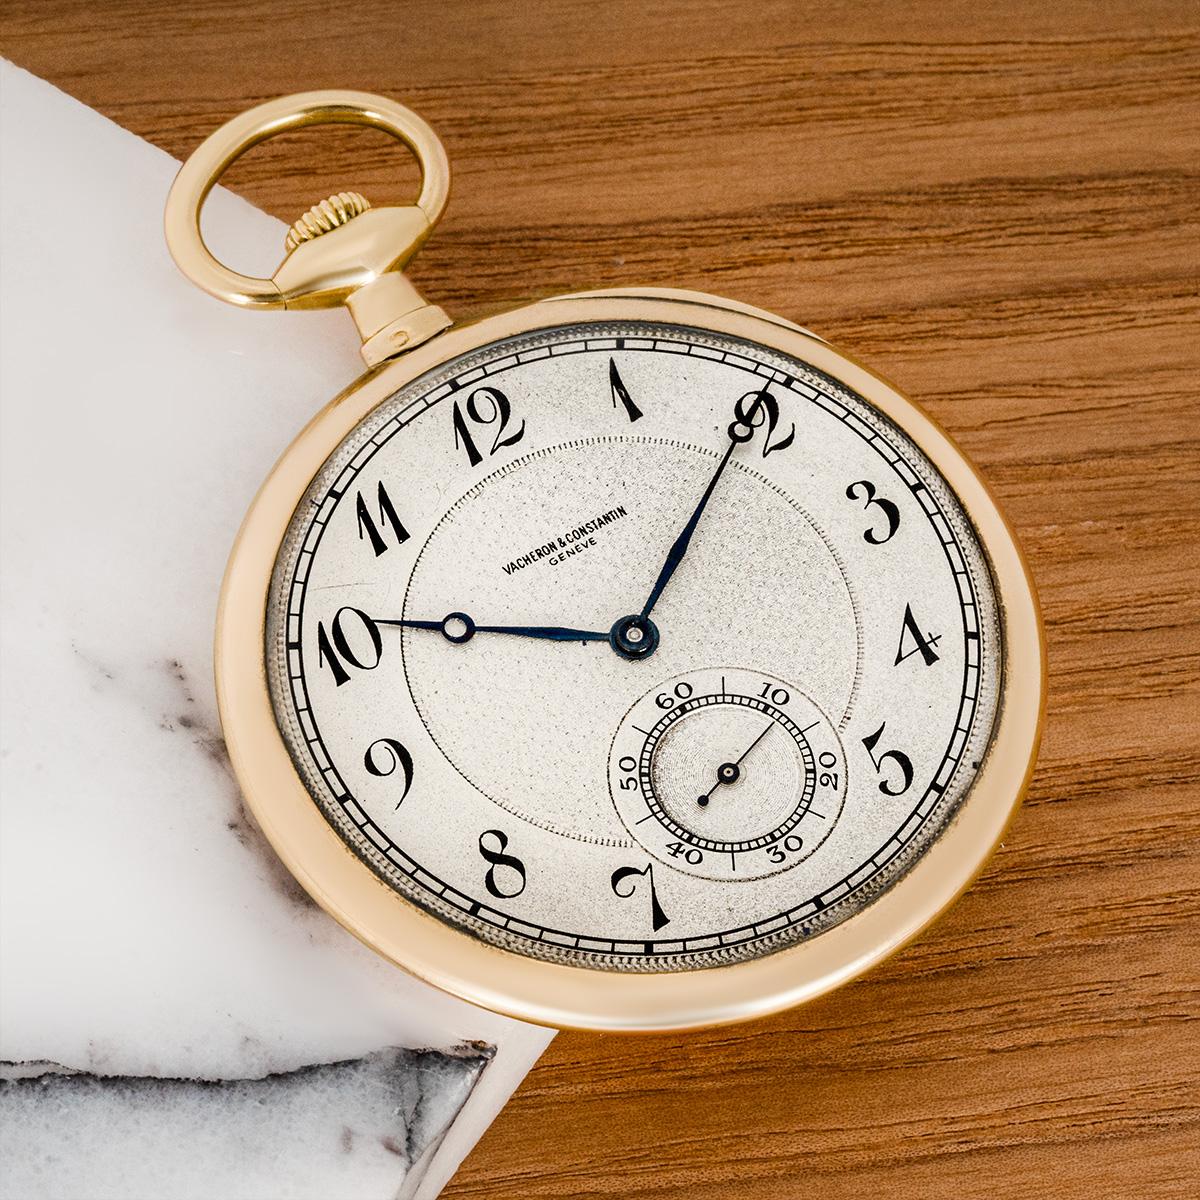 Vacheron Constantin. An 18ct Yellow Gold Slim Keyless lever Open Face Pocket Watch C1905.

Dial: The beautiful Silver dial signed Vacheron Constantin Geneve with engine turned centre with Breguet style numerals outer minute track and subsidiary